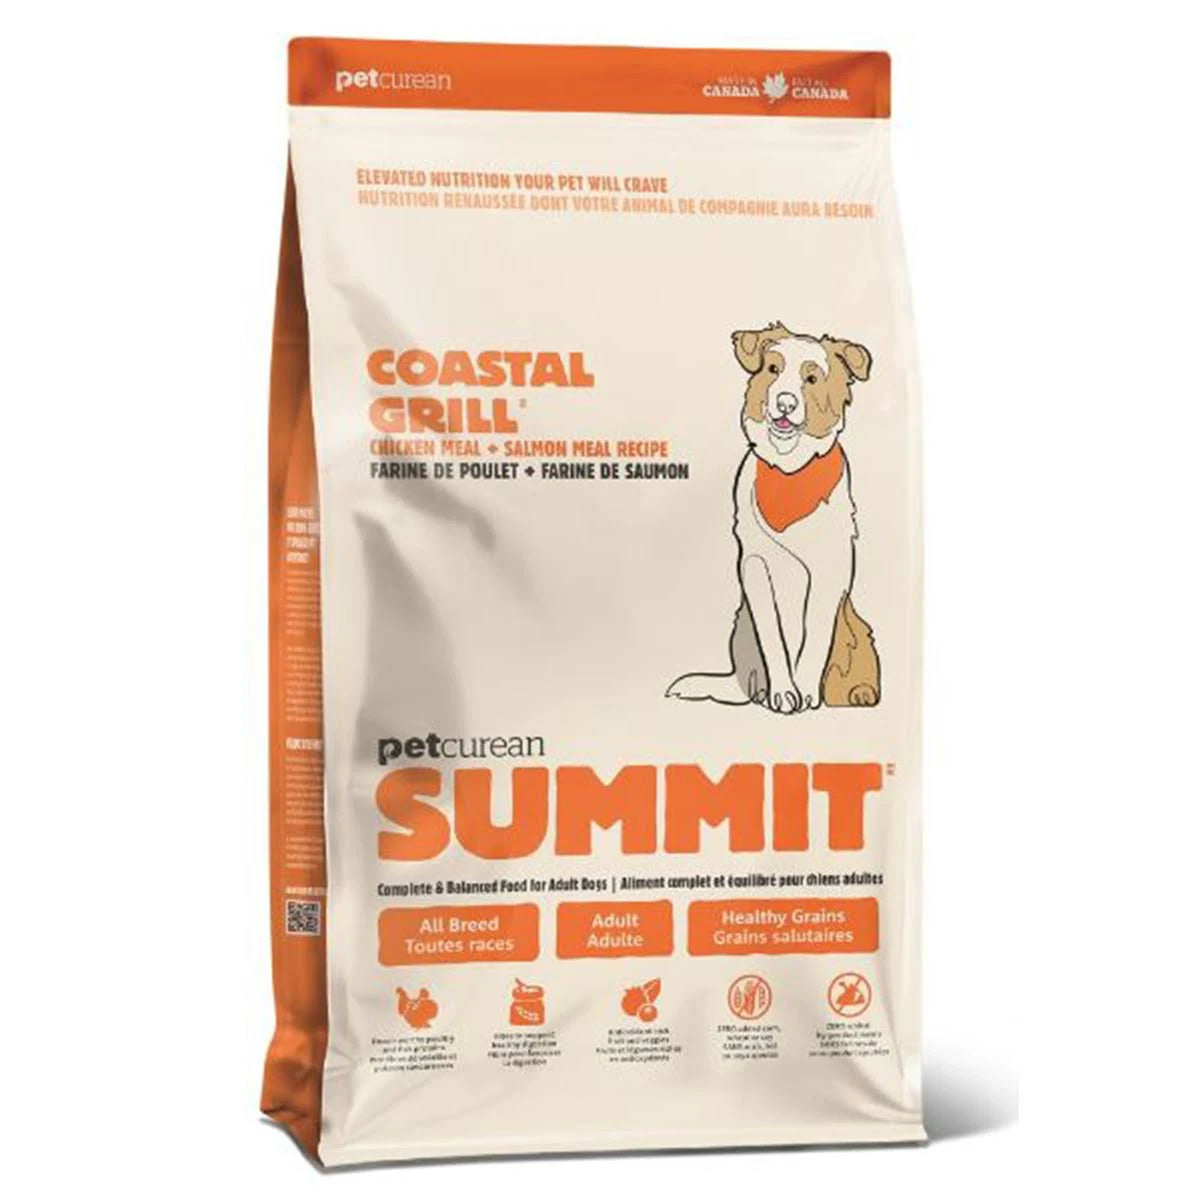 SUMMIT COASTAL GRILL : CHICKEN MEAL + SALMON MEAL RECIPE FOR ADULT DOGS